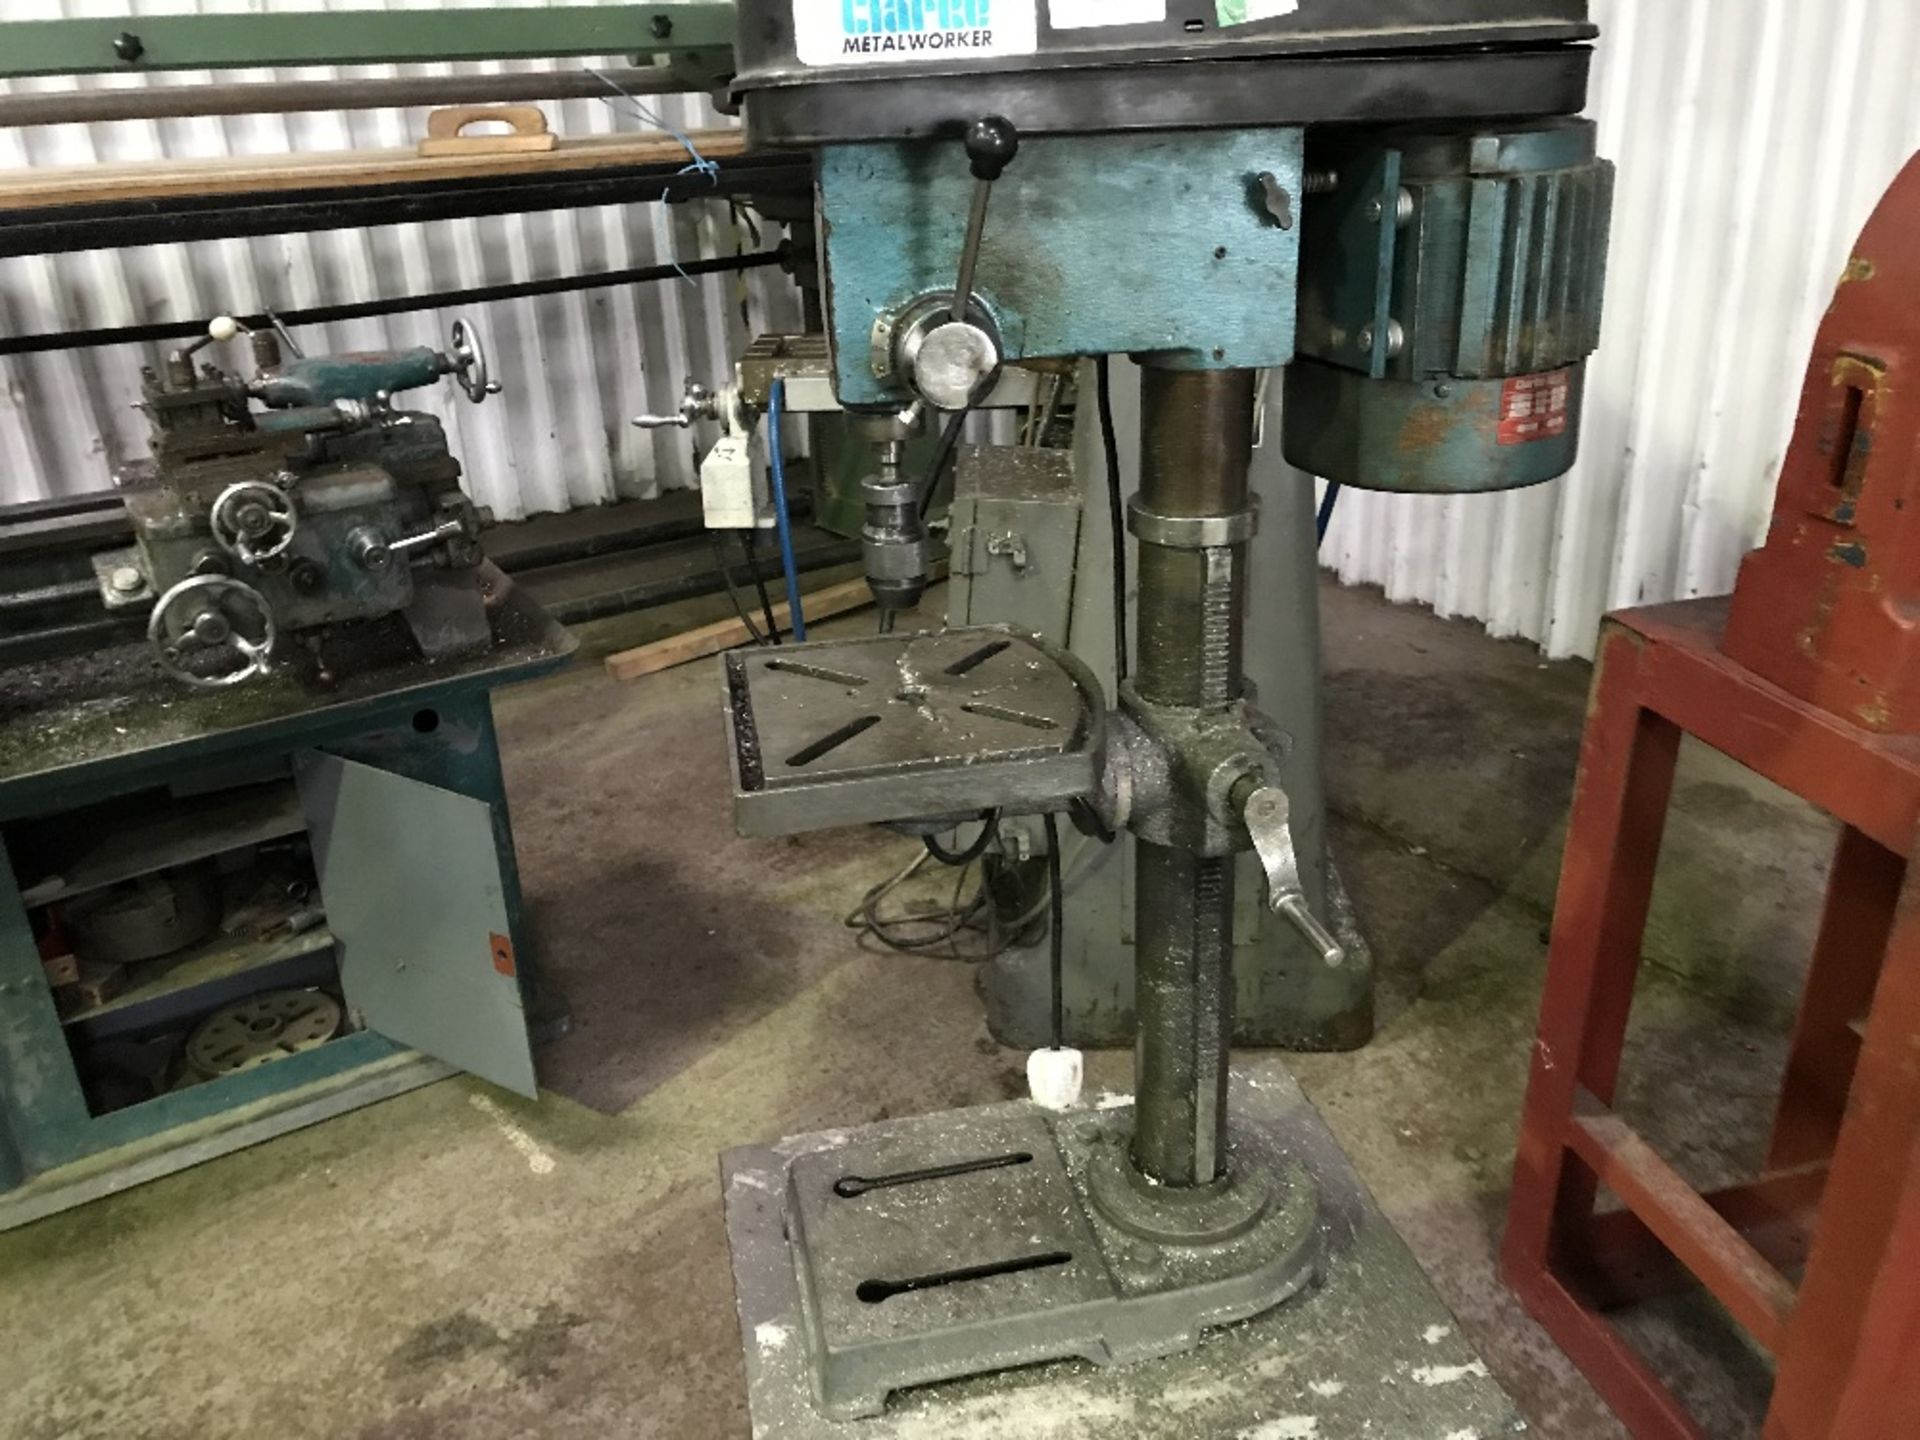 CLARKE METAL WORKER PILLAR DRILL, RECENTLY REMOVED FROM WORKING ENVIRONMENT